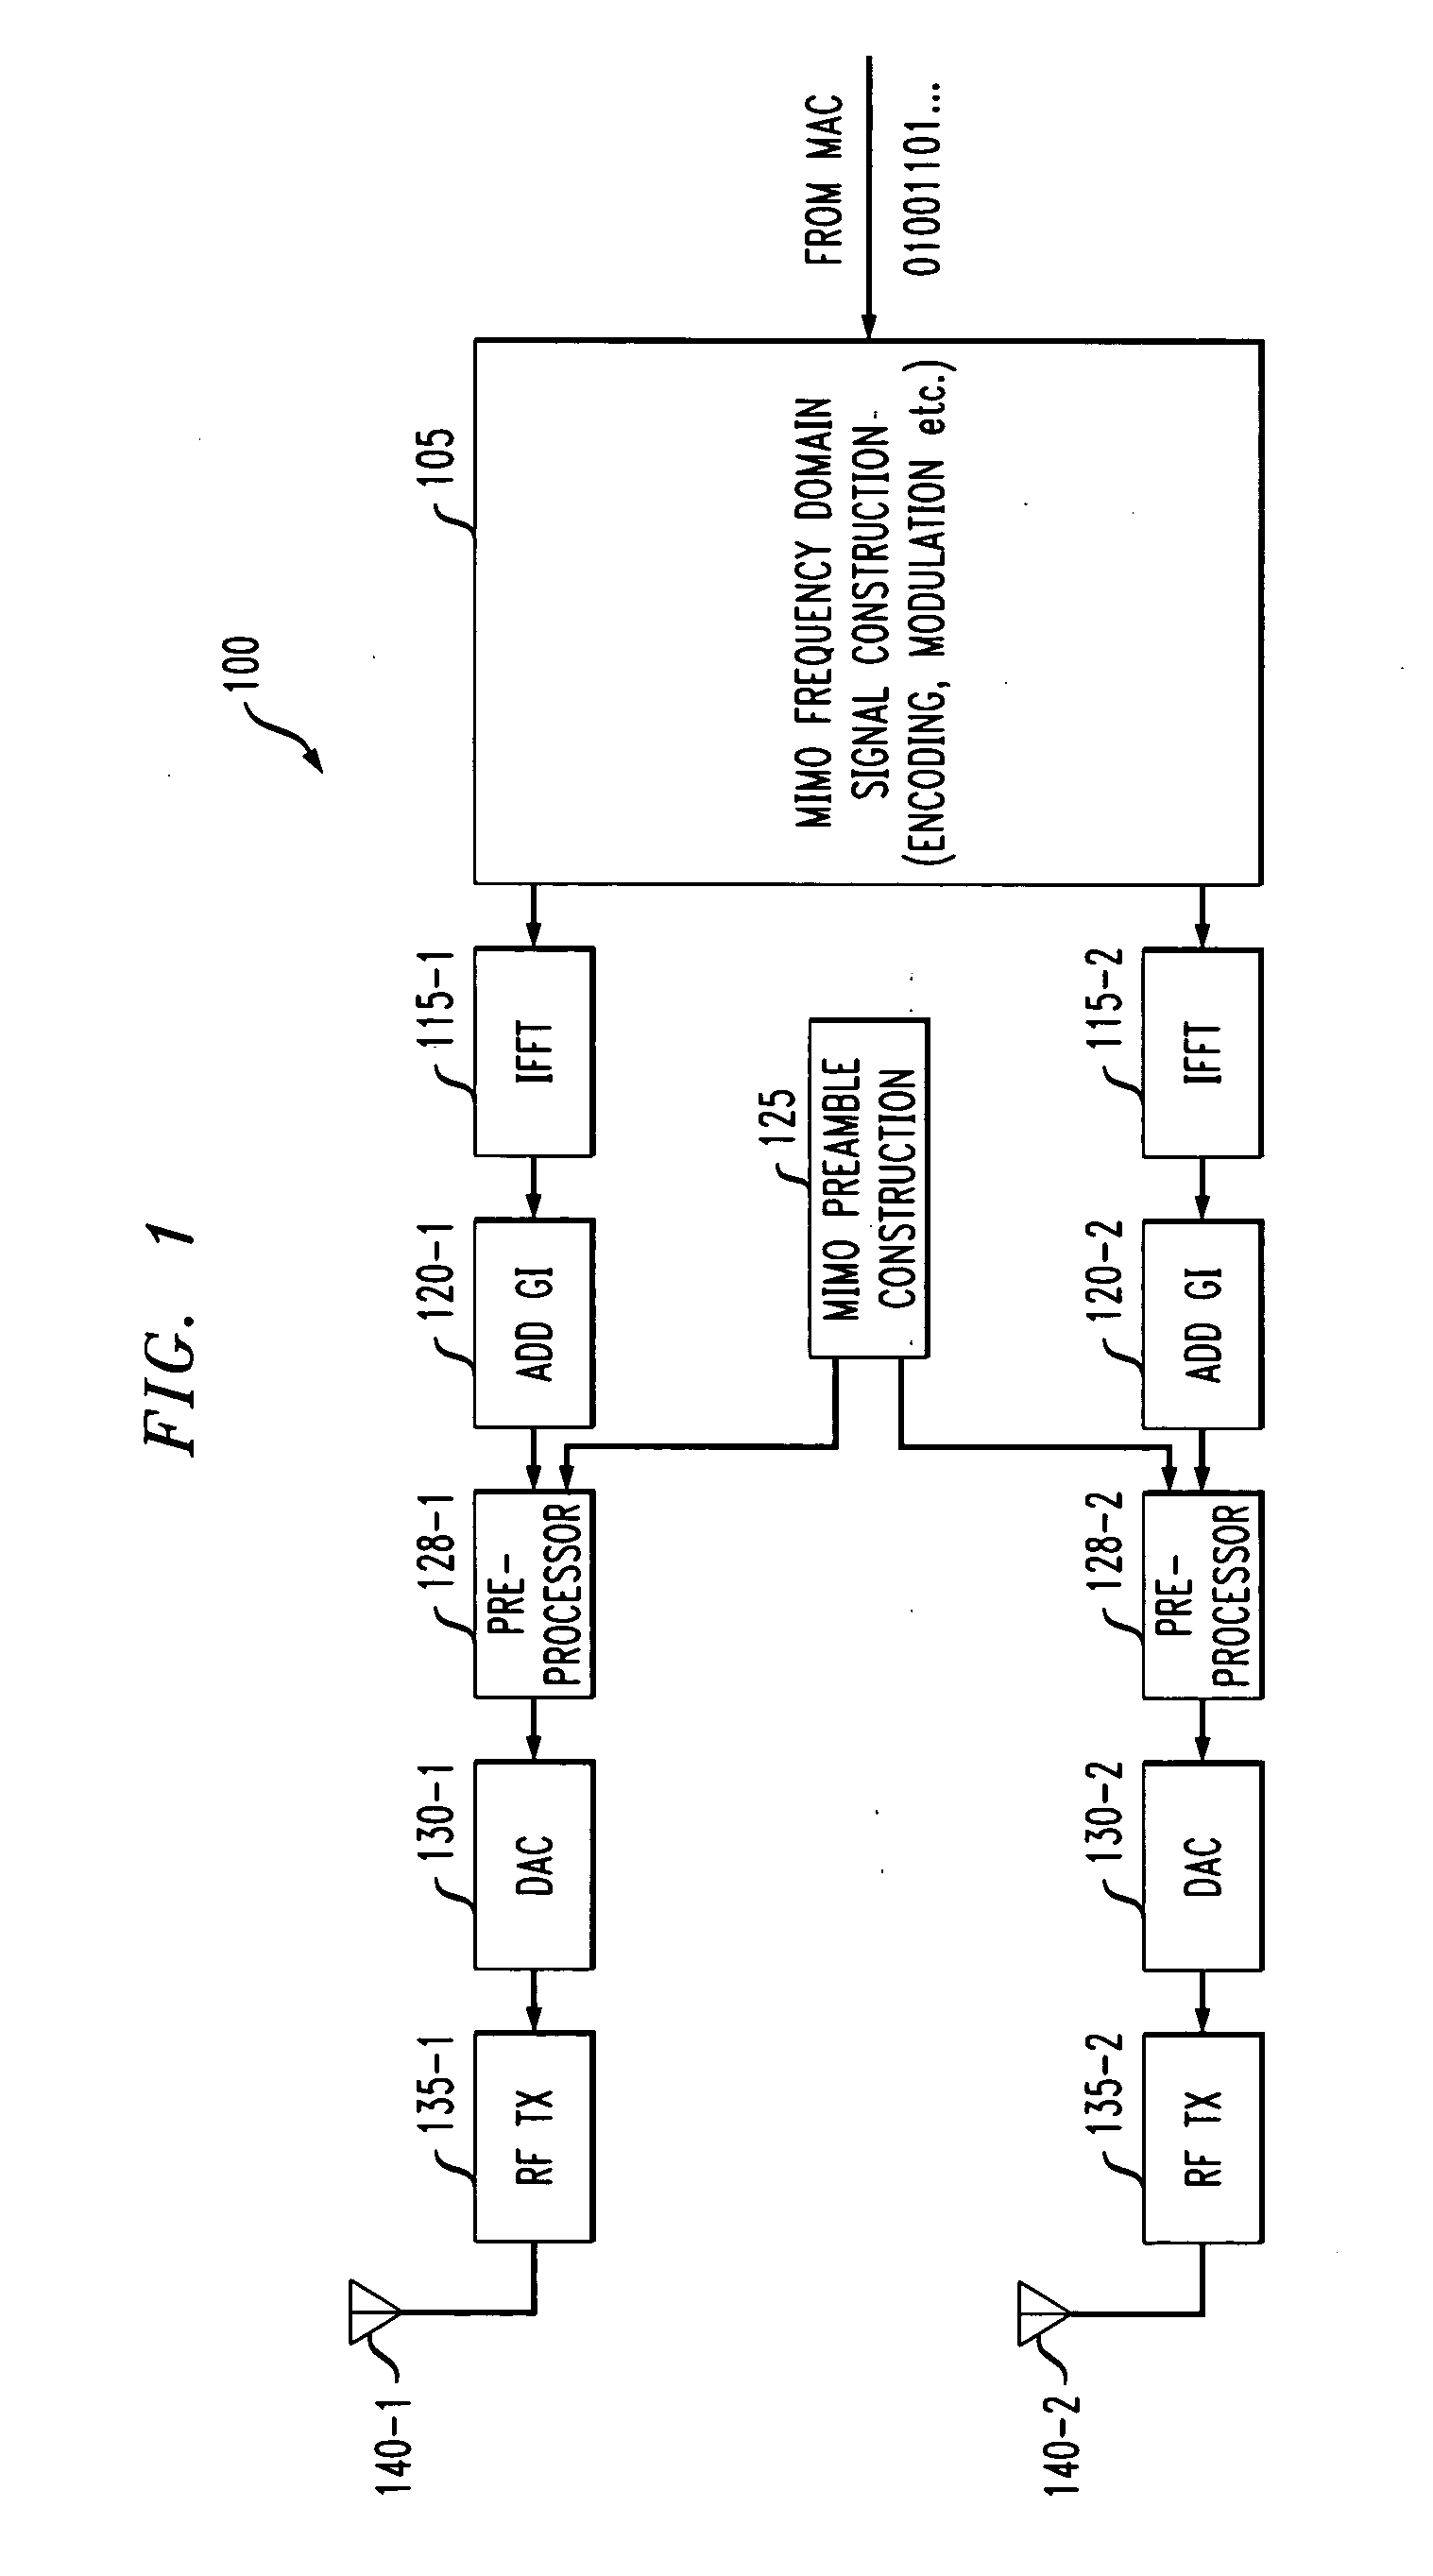 Method and apparatus for improved antenna isolation for per-antenna training using transmit/receive switch